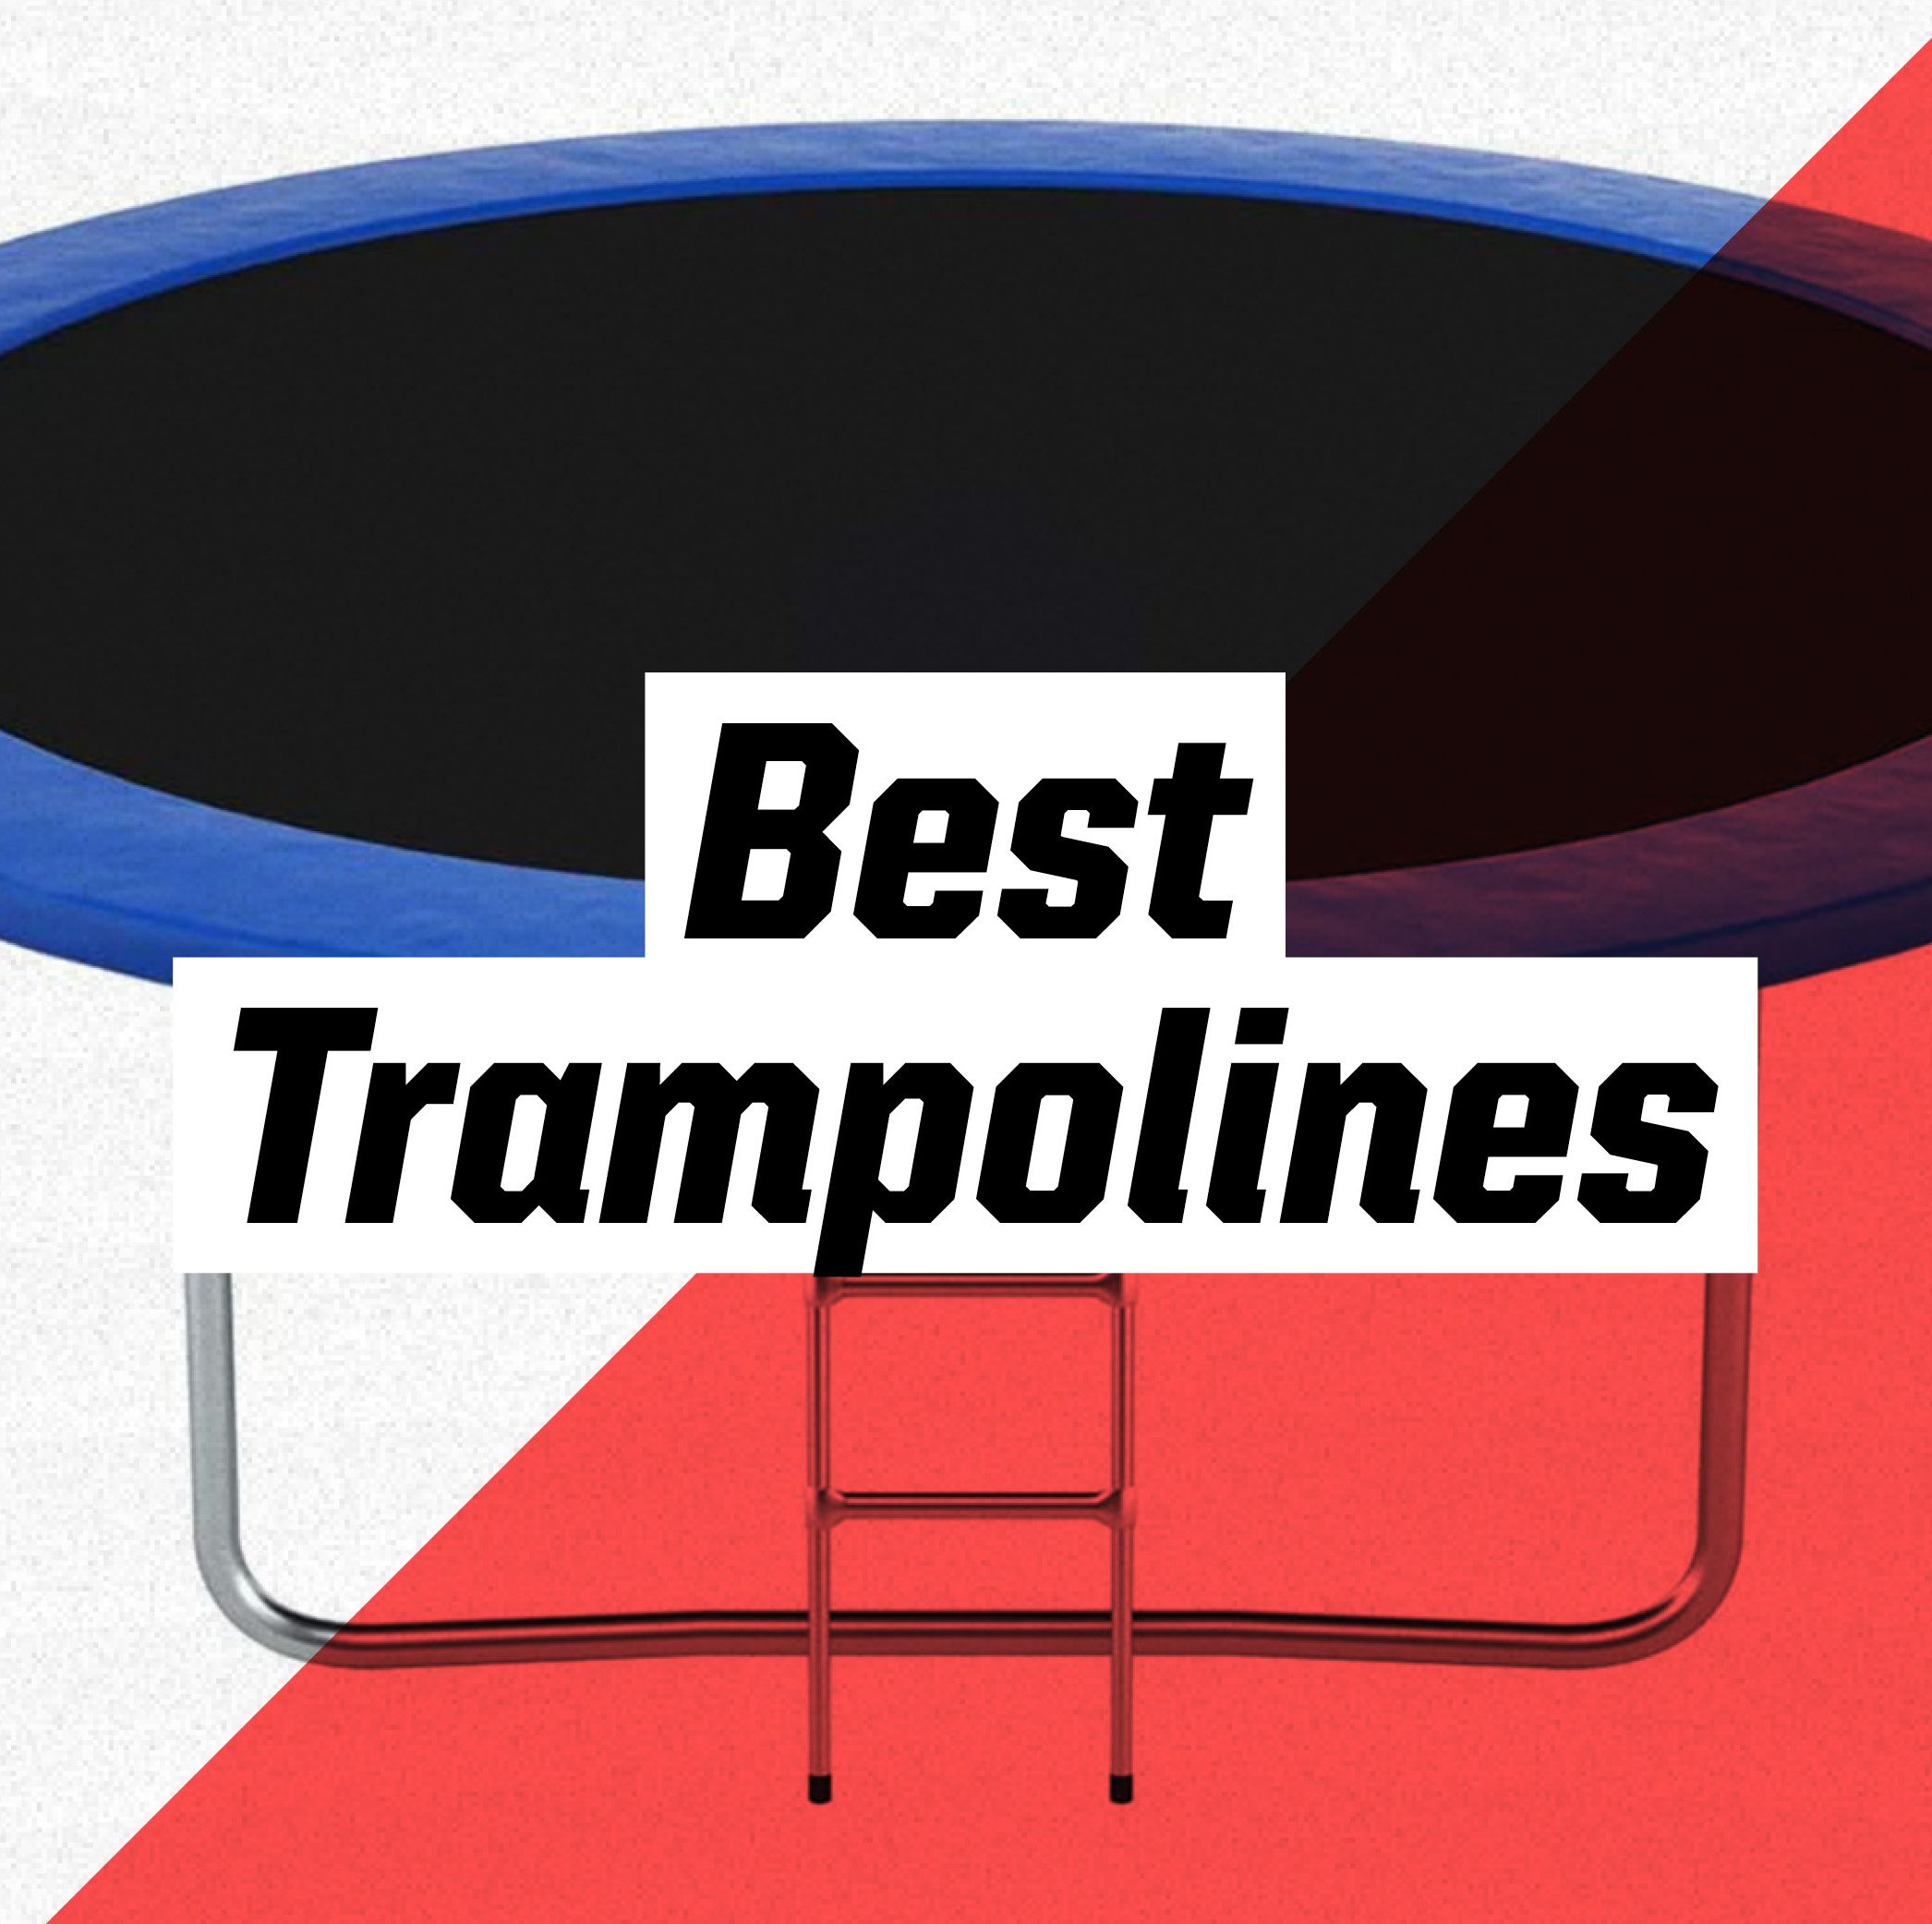 The 10 Best Trampolines for Family Fun